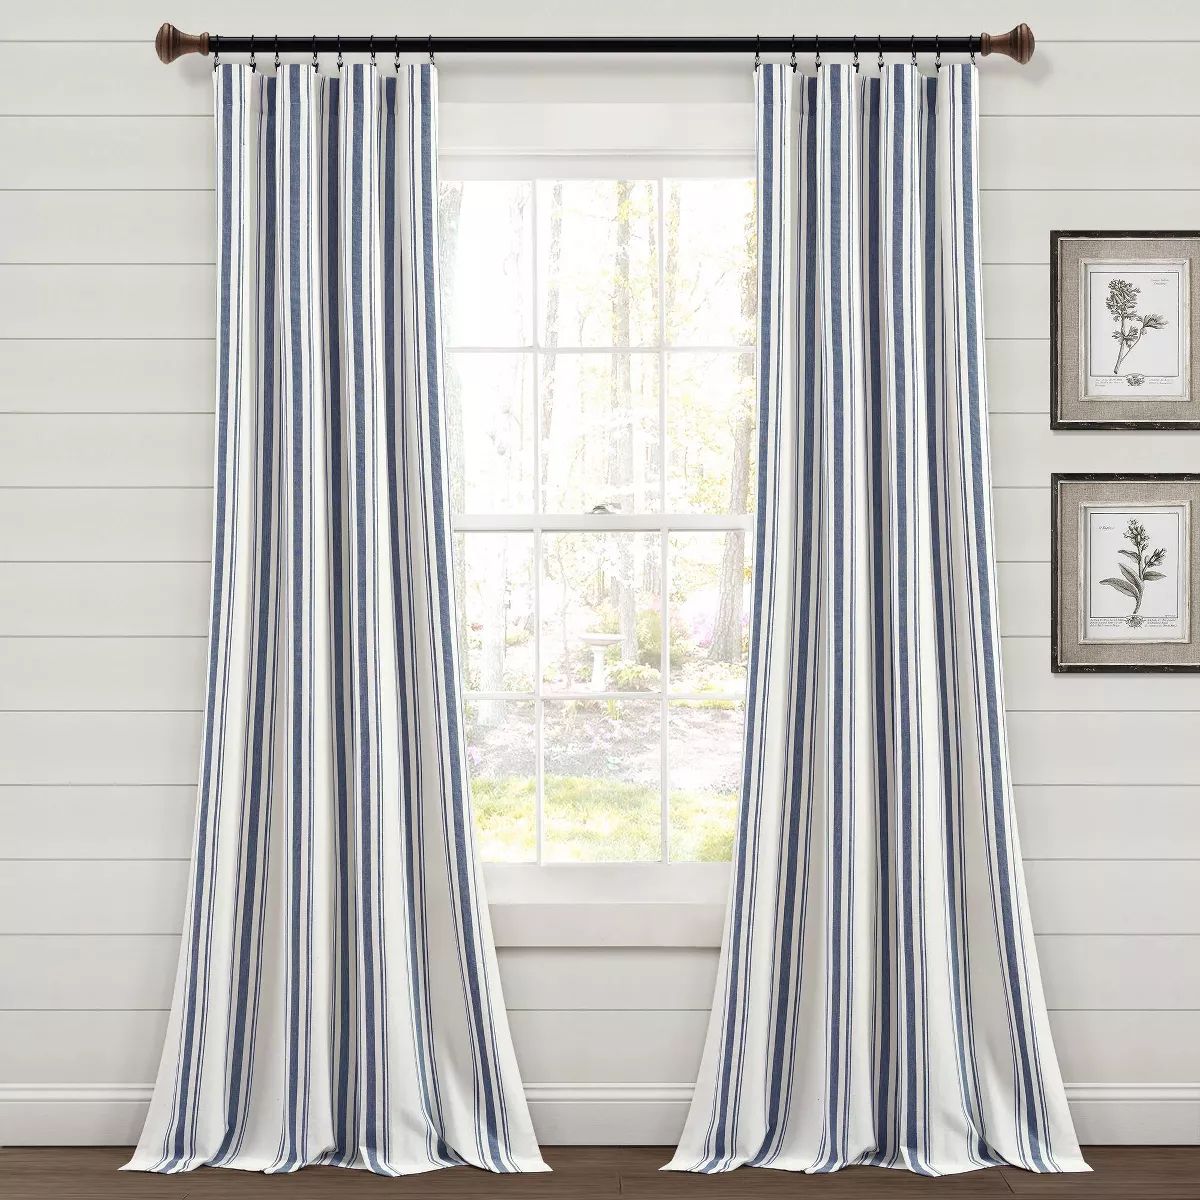 Set of 2 (84"x42") Farmhouse Striped Yarn Dyed Eco-Friendly Recycled Cotton Window Curtain Panels... | Target